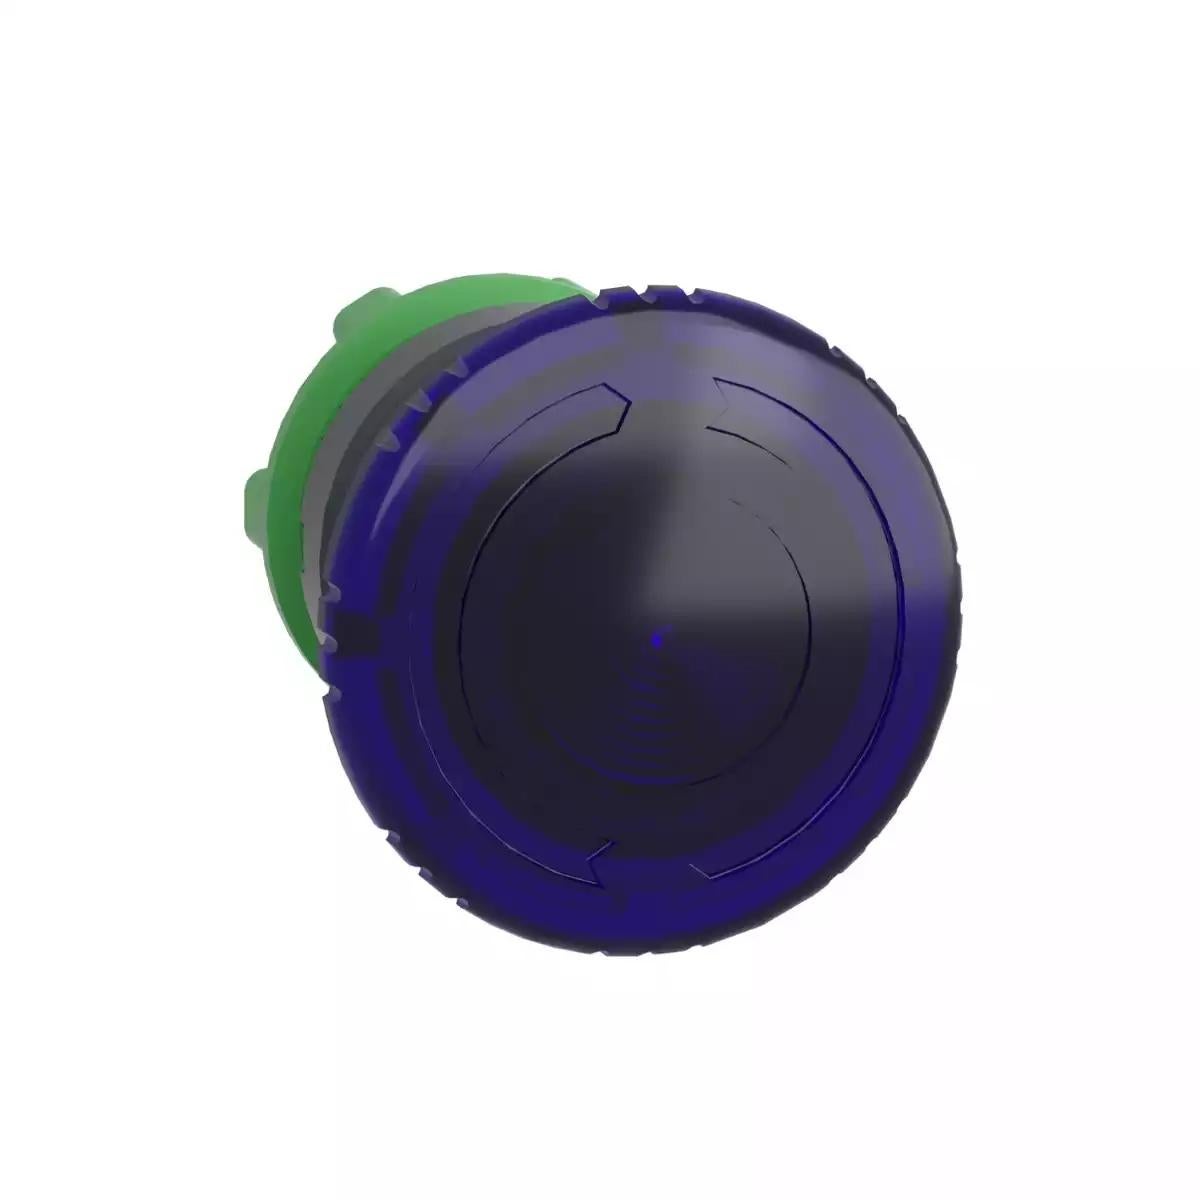 Head for illuminated push button, Harmony XB5, plastic, blue mushroom 40mm, 22mm, latching turn to release, clear boot